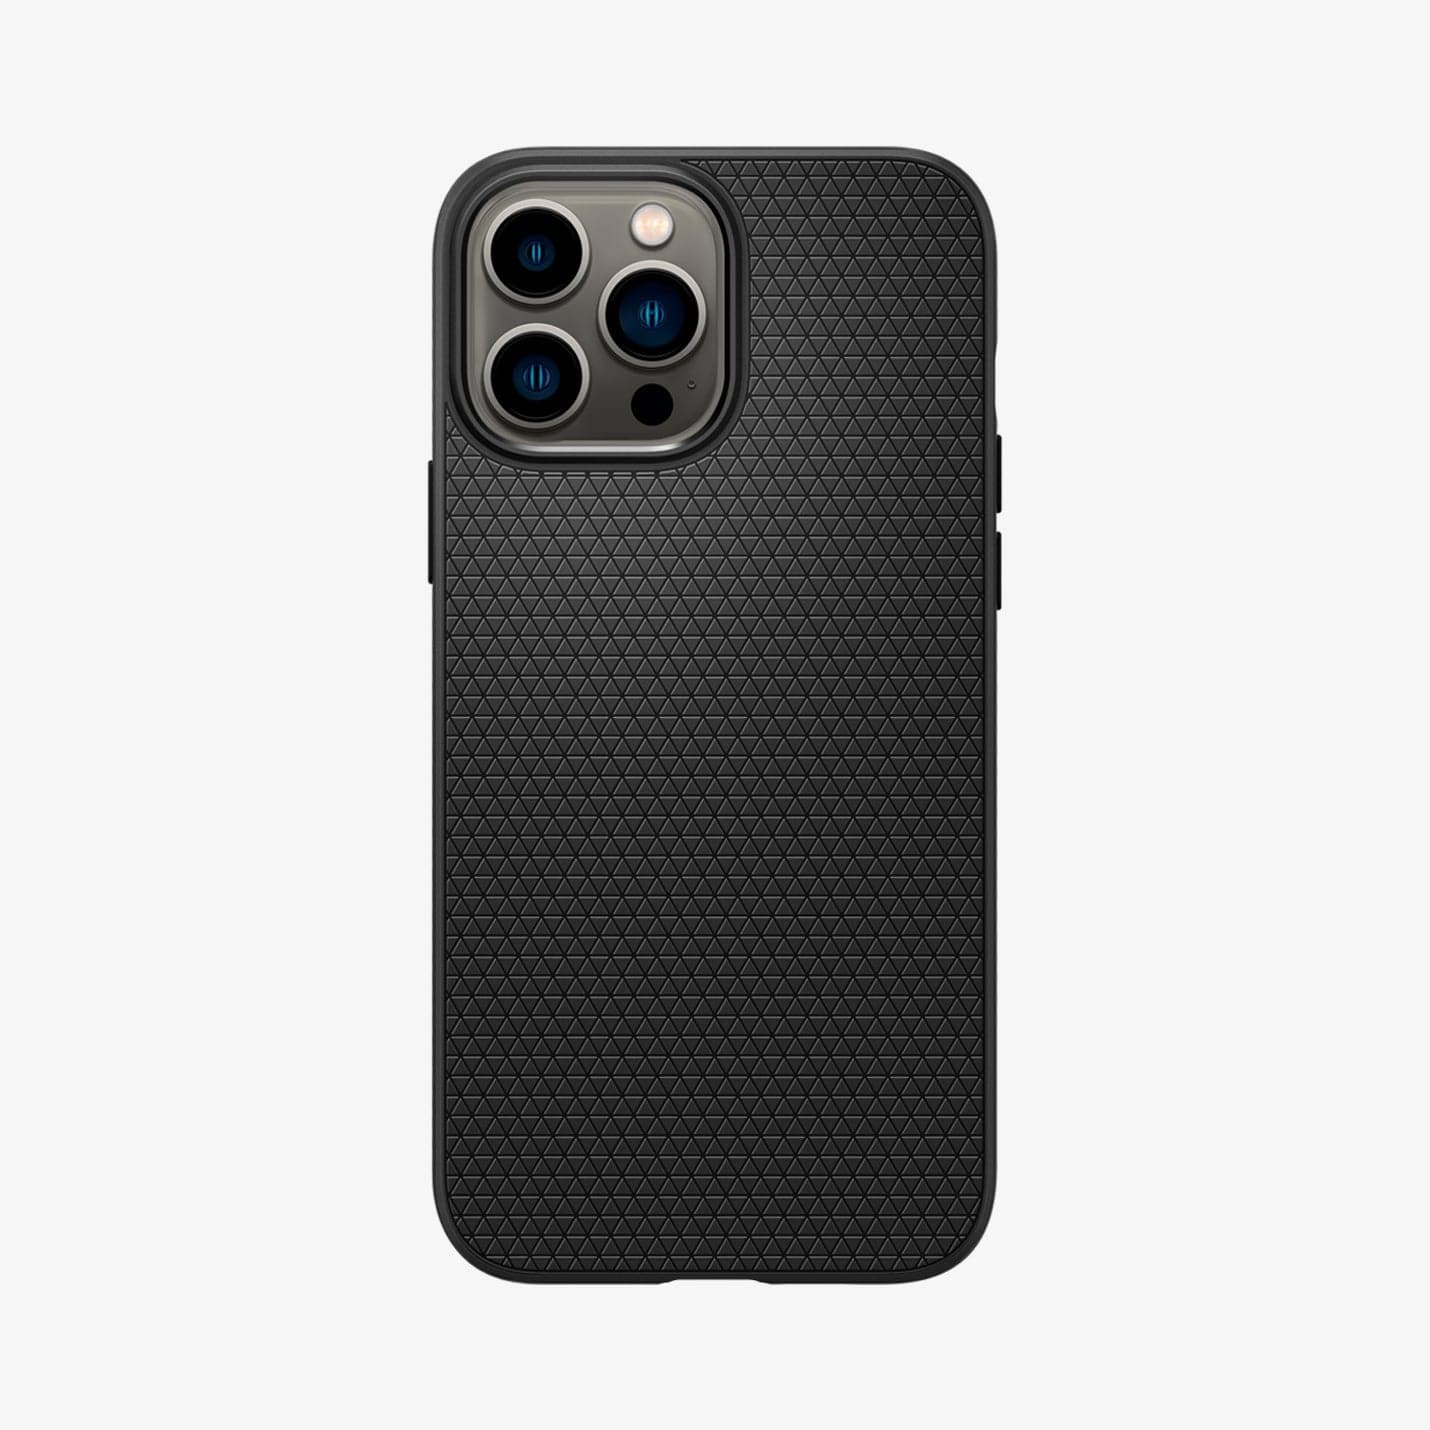 ACS03201 - iPhone 13 Pro Max Case Liquid Air in matte black showing the back